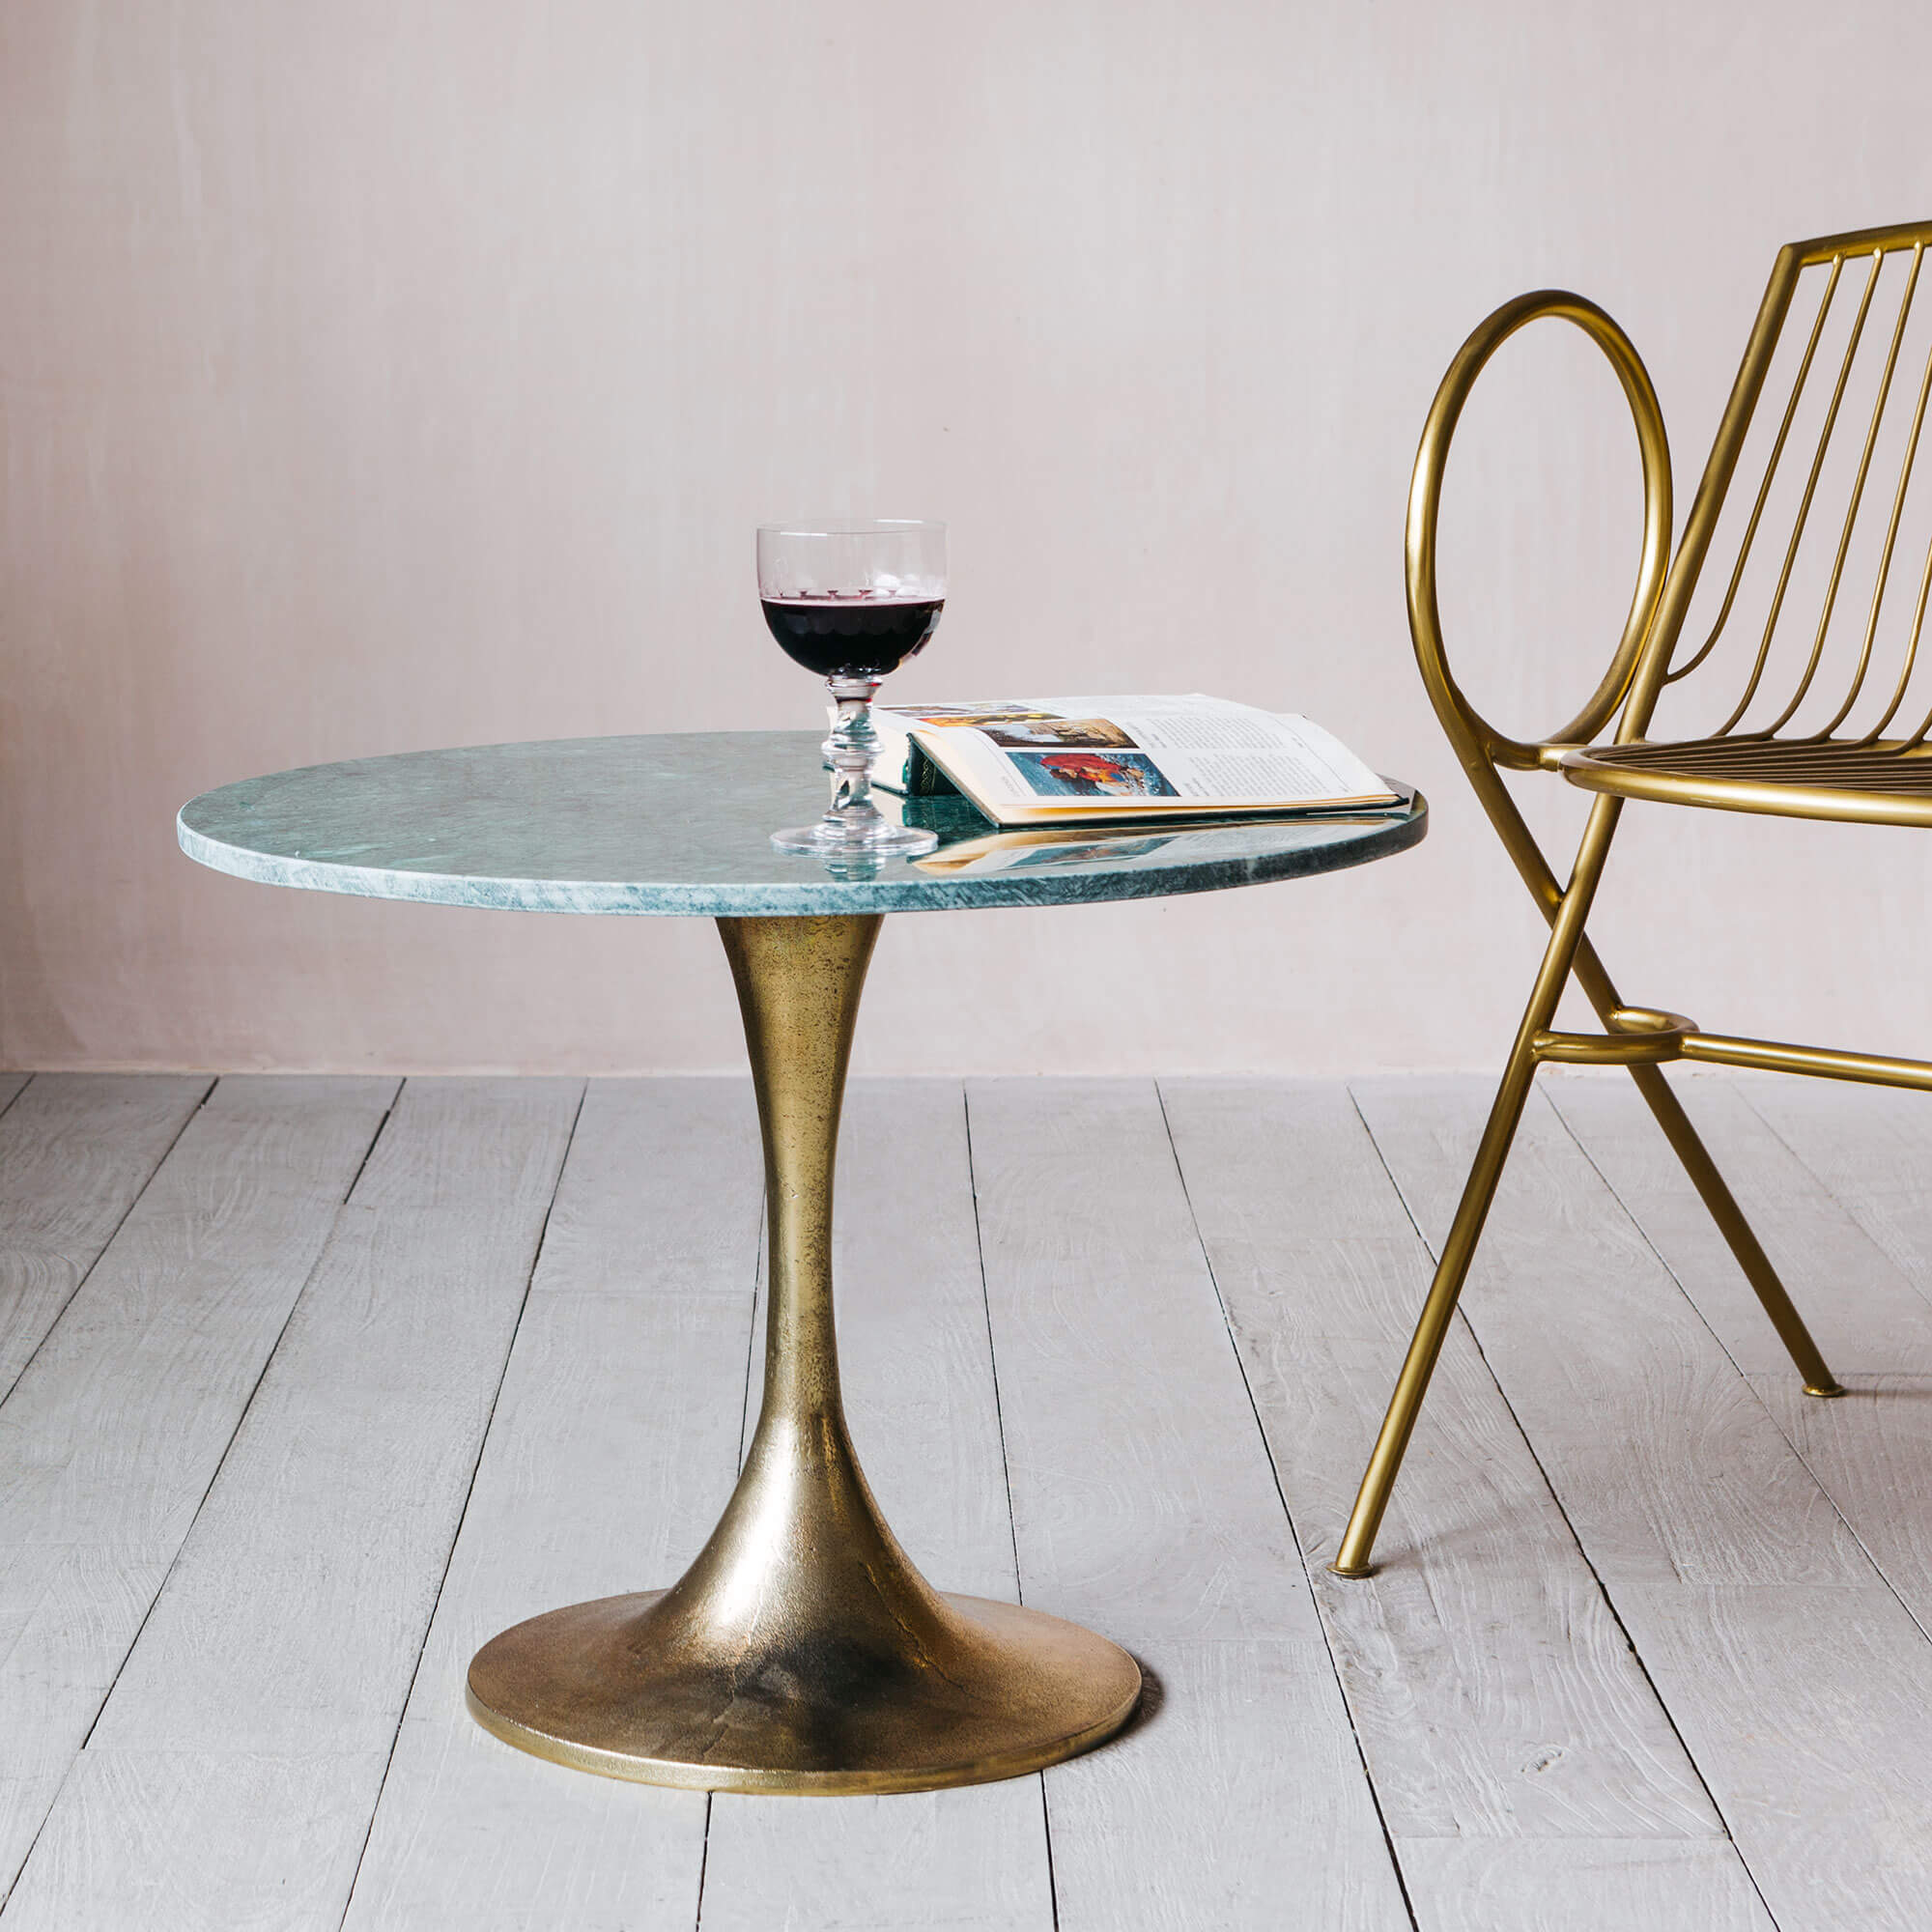 Read more about Graham and green ayla green marble side table